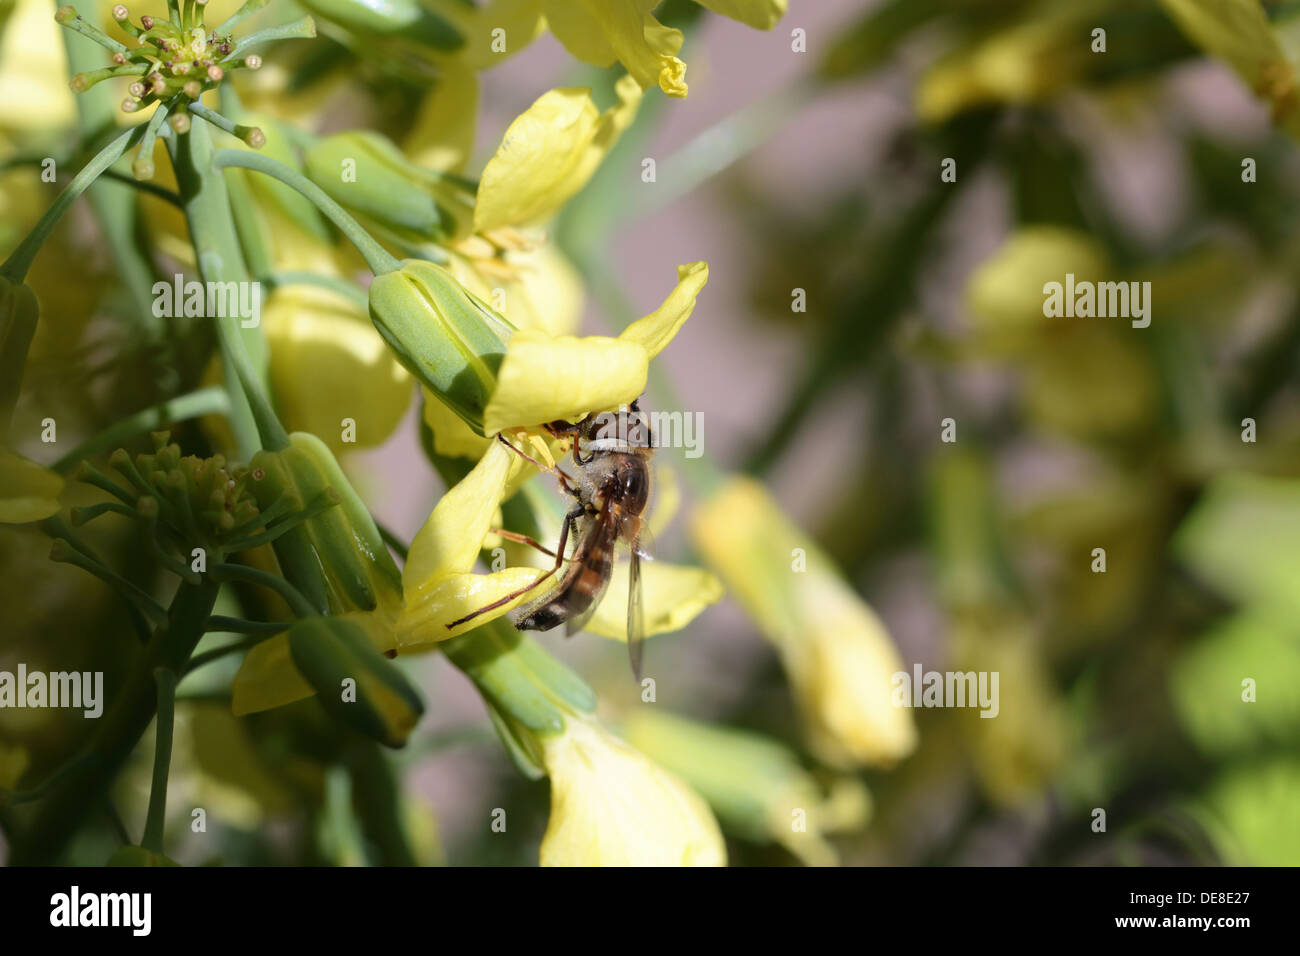 Wasp feeding on the nectar of a broccoli flower in an urban garden in Cape Town Stock Photo